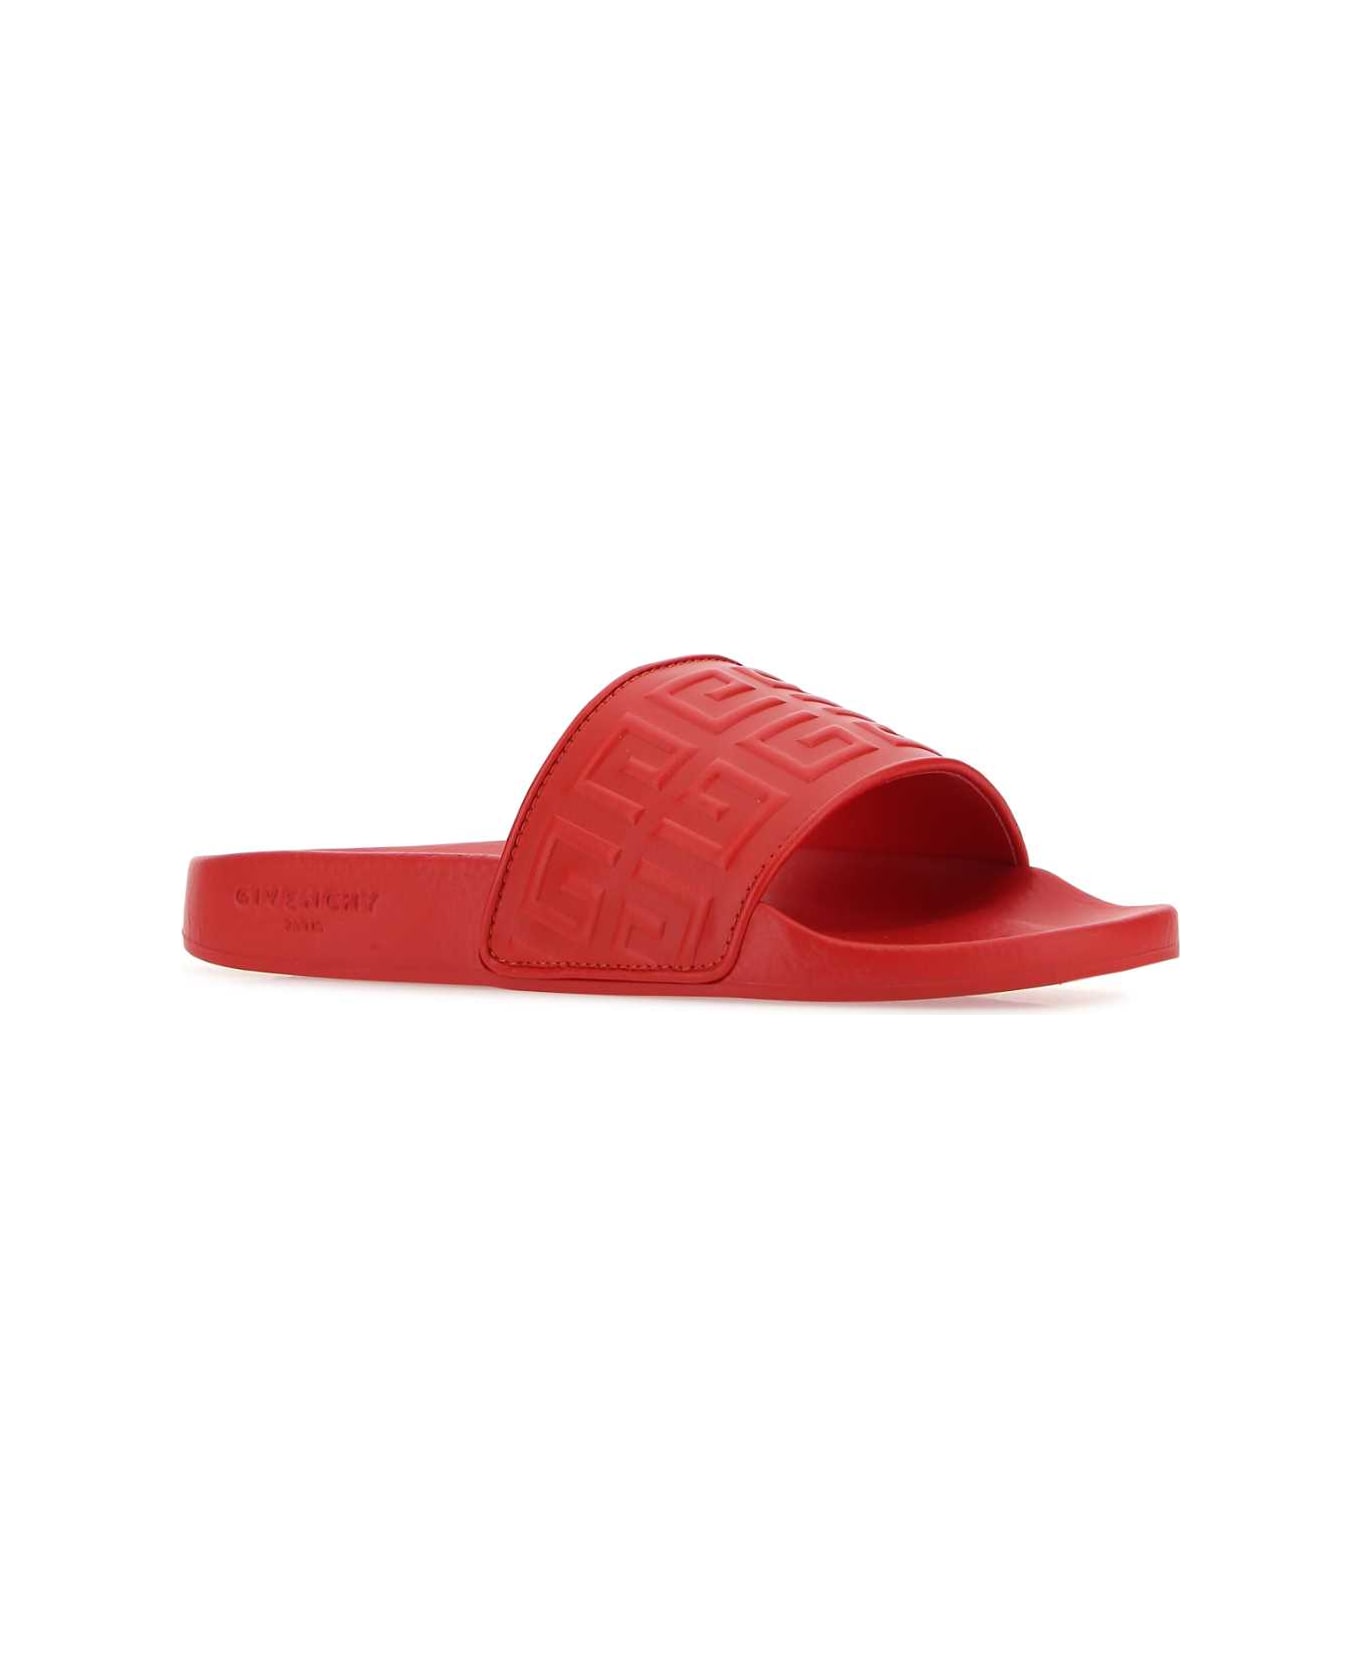 Givenchy Red Leather 4g Slippers - 600